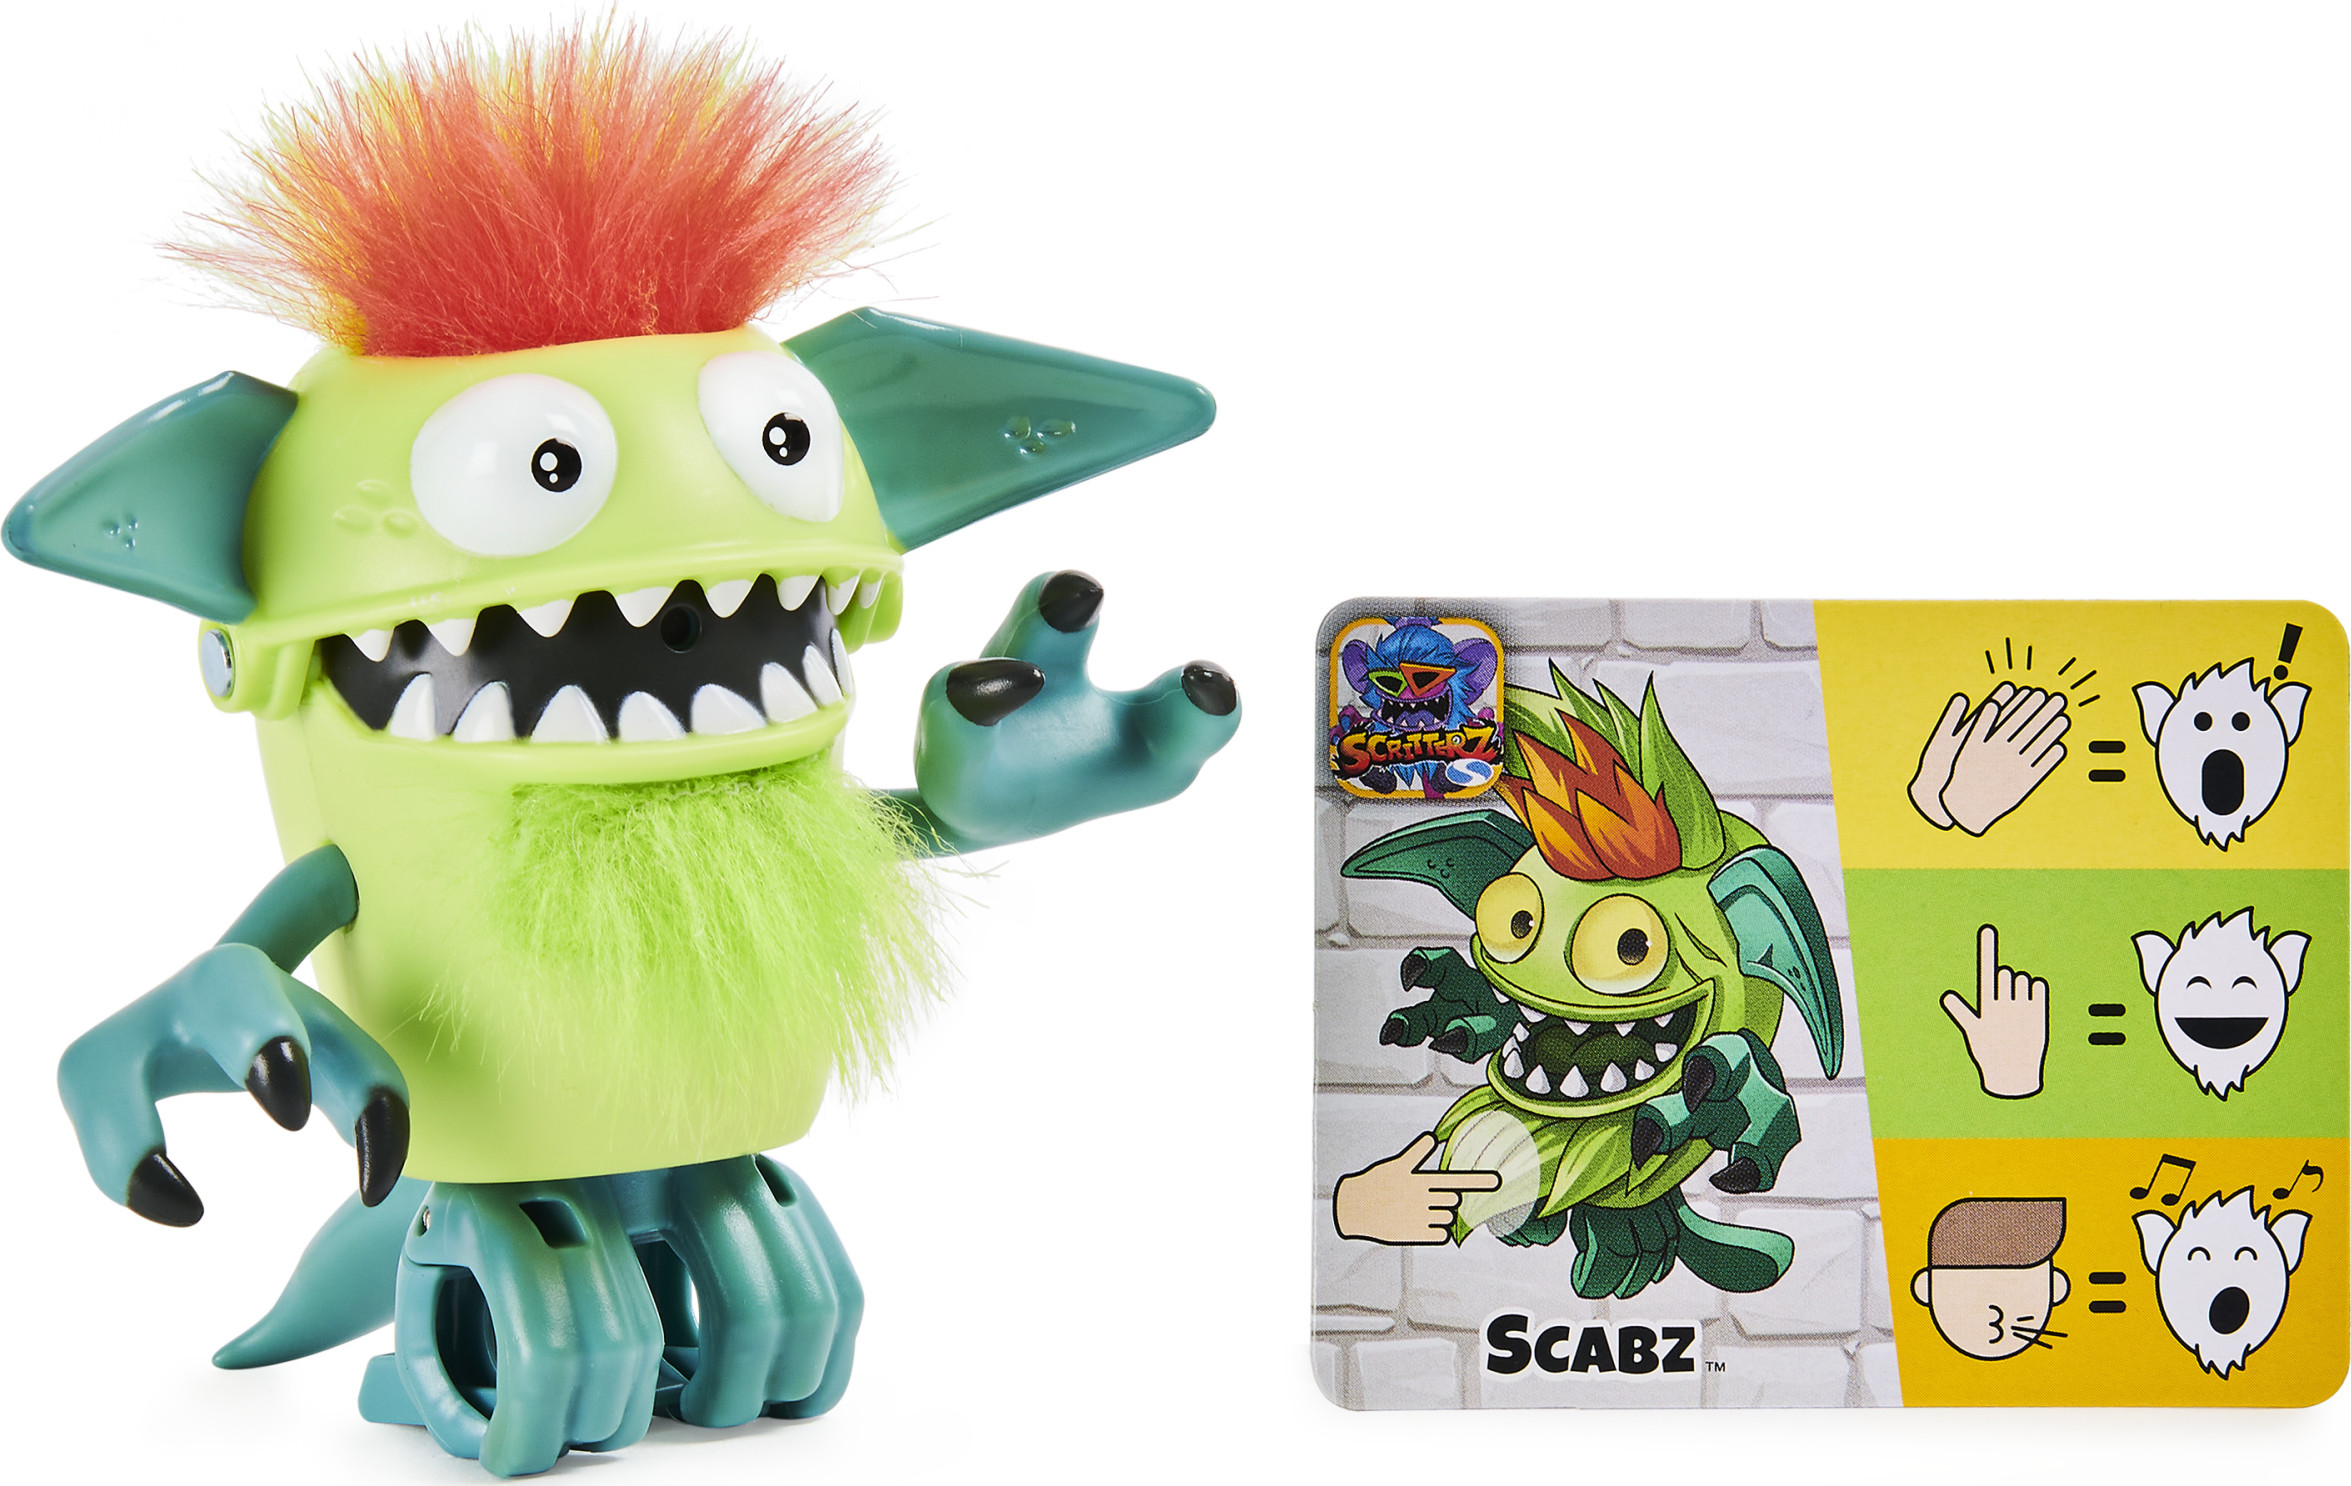 Scritterz, Scabz Interactive Collectible Jungle Creature Toy with Sounds and Movement, for Kids Aged 5 and up - image 4 of 10